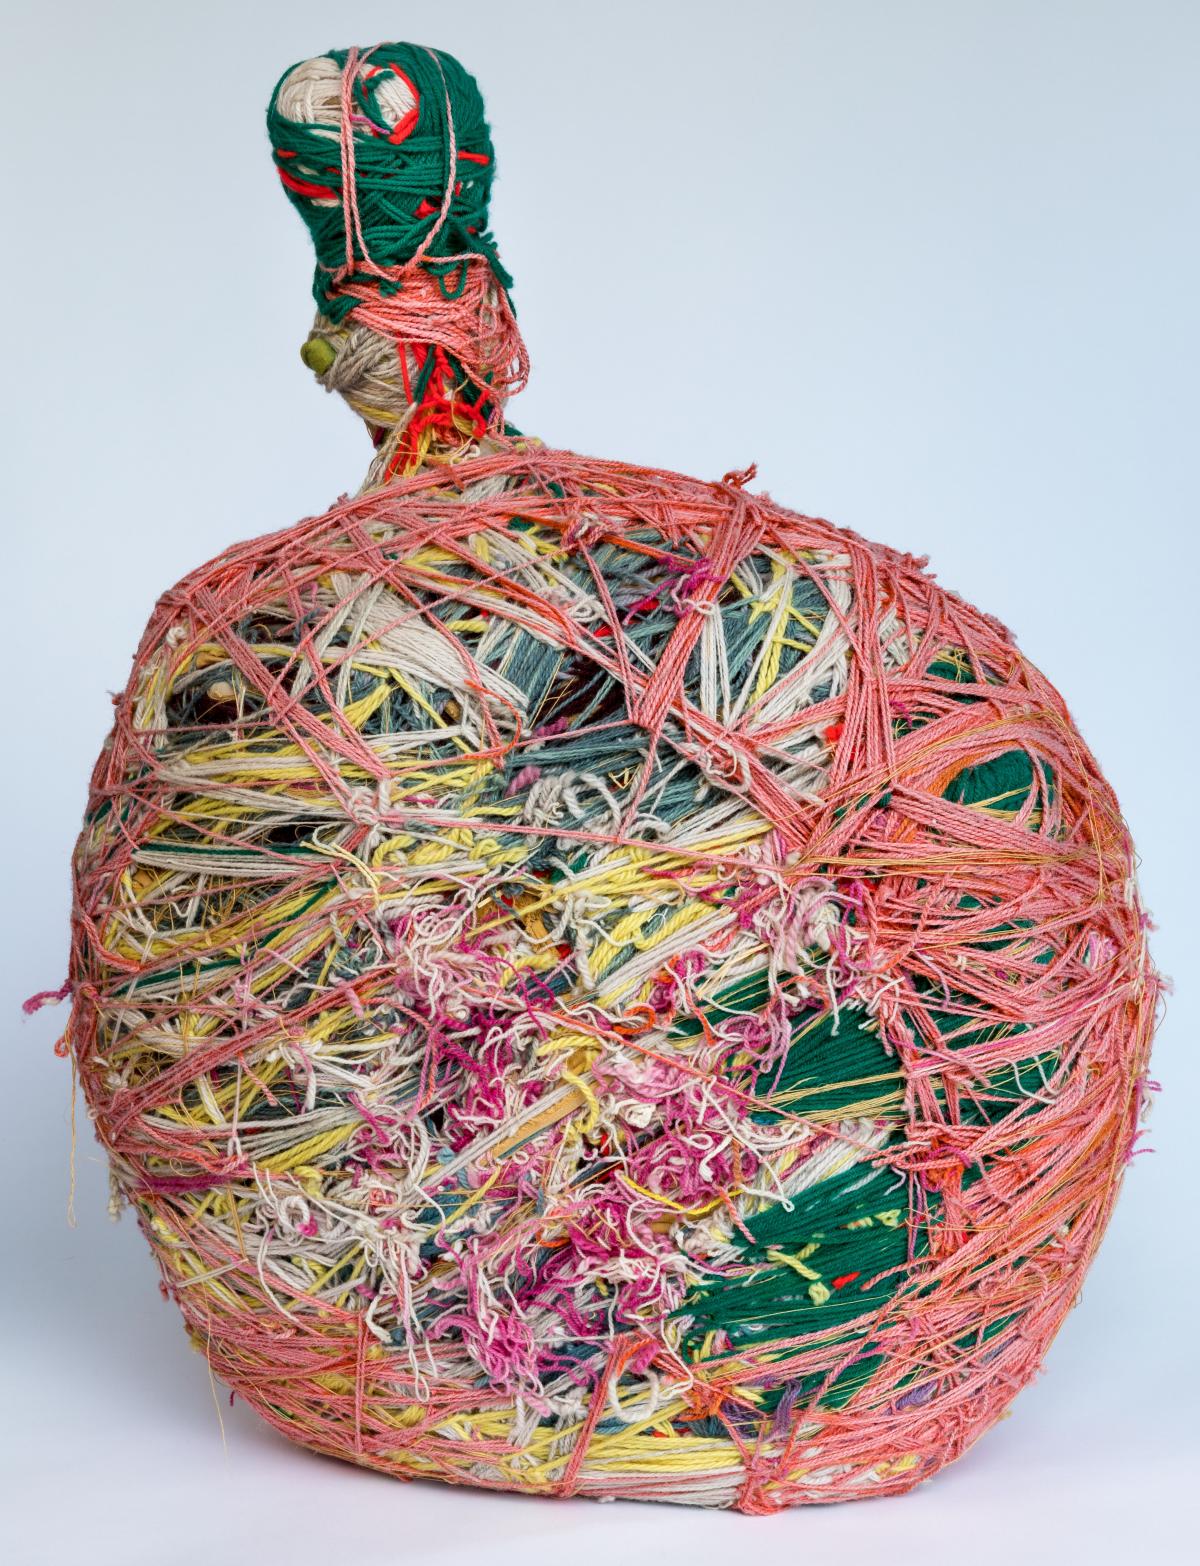 A bottle wrapped in colorful threads 